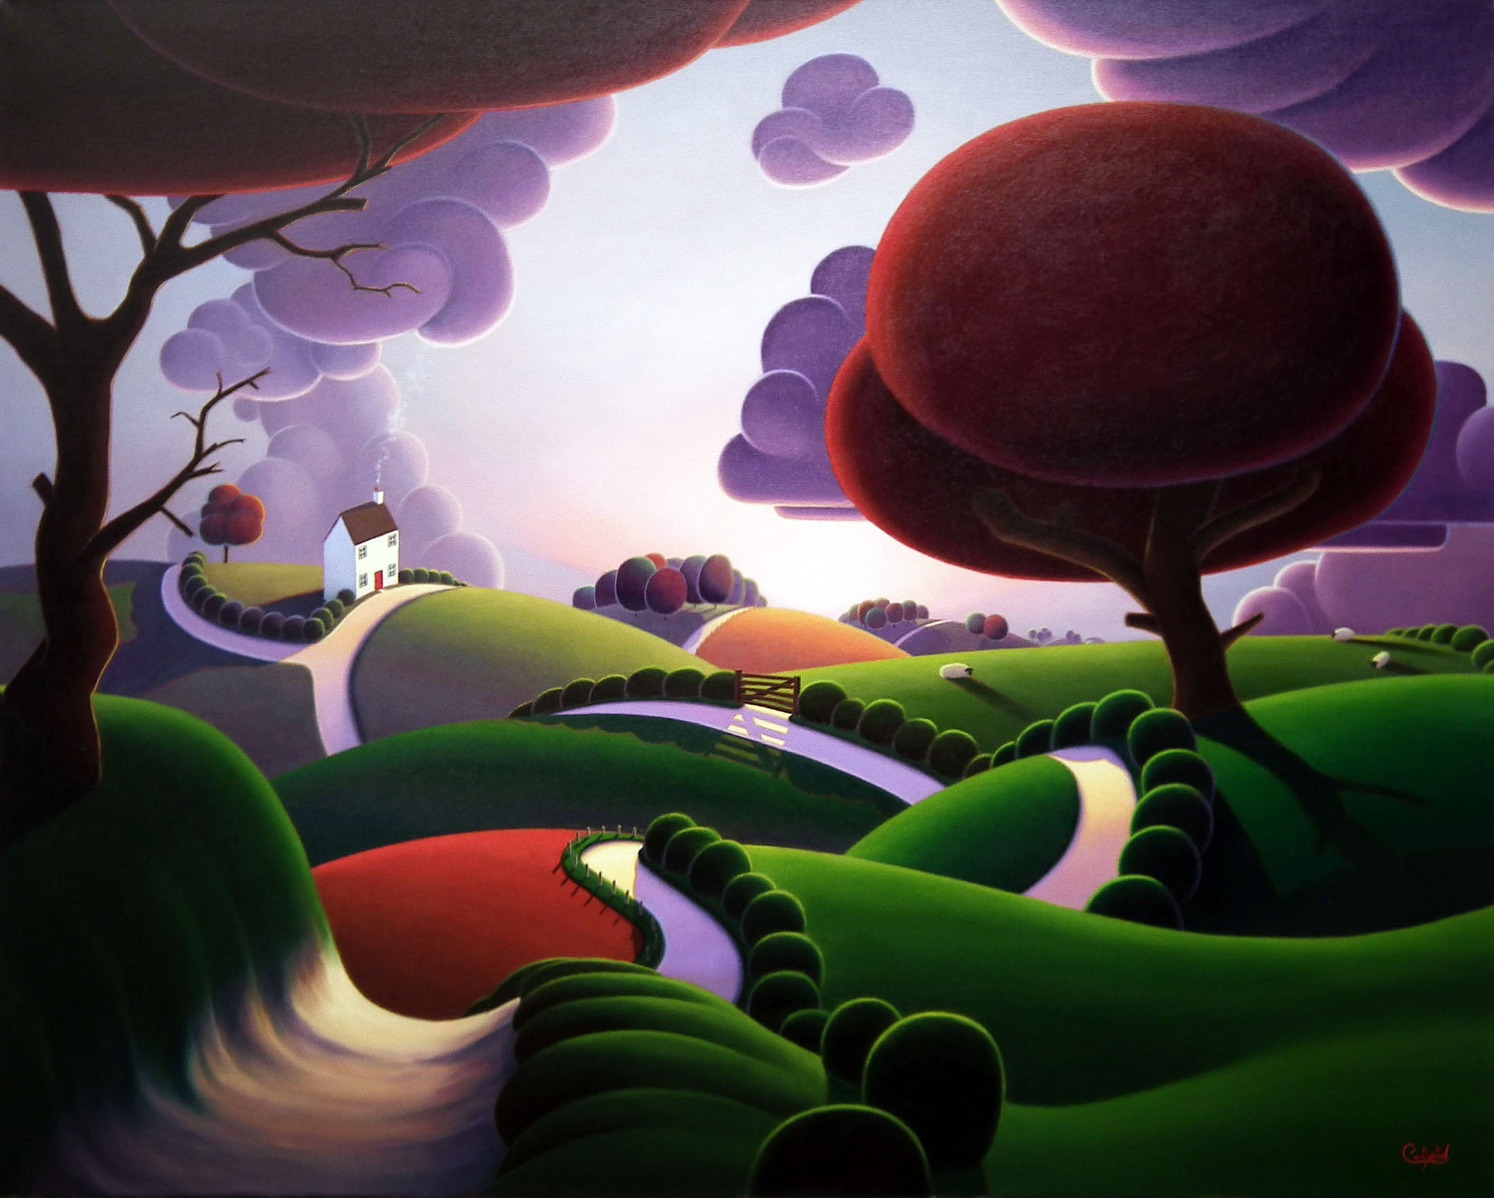 Over the Hills and Far Away by Paul Corfield, Landscape | Naive